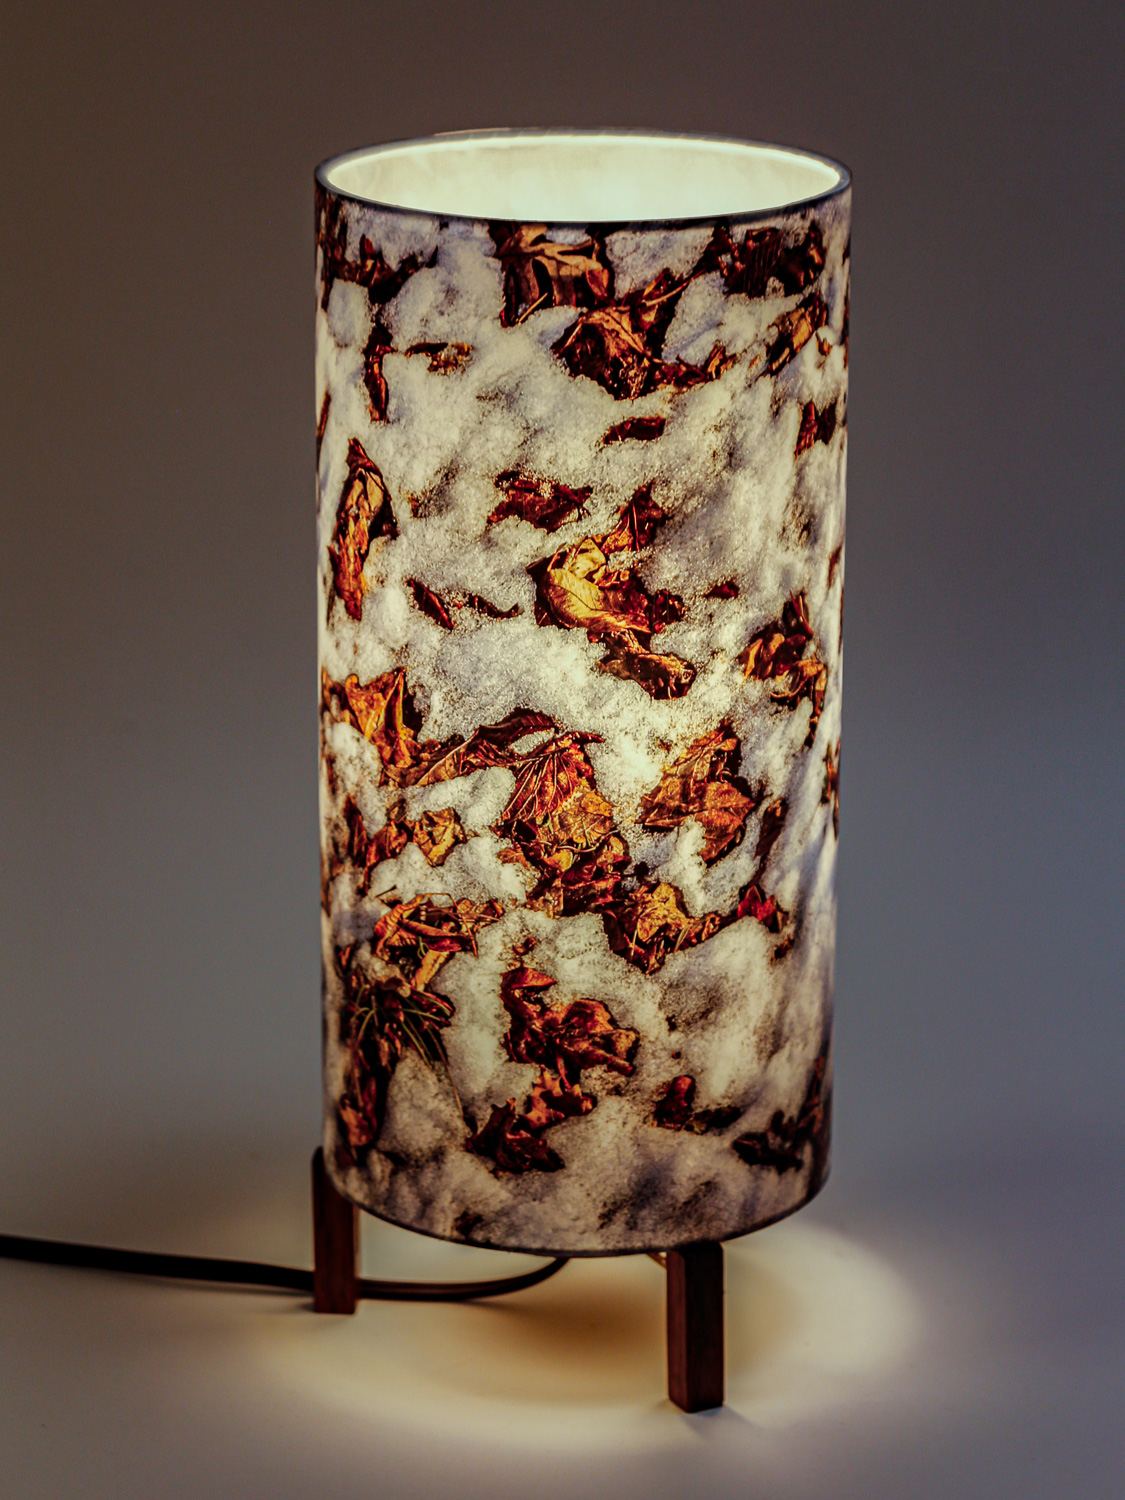 : Minimalist lamp with photo lampshade with image of melting snow. -- Photo on Lamp shade by David Elmore